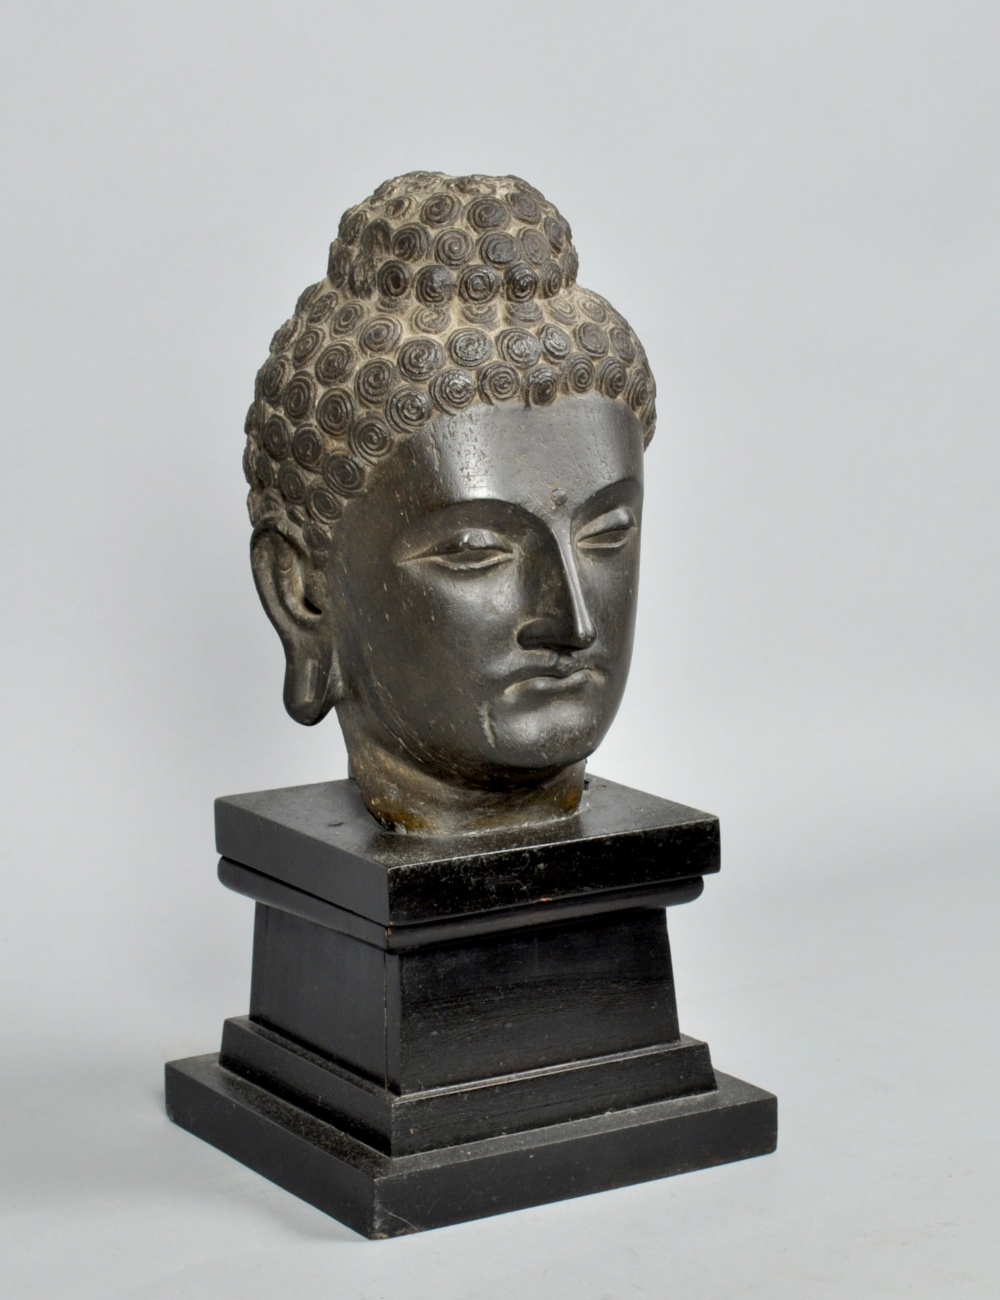 An Indian black stone sculpture of a head, on wooden plinth, the head 10""h, 16"" high overall.